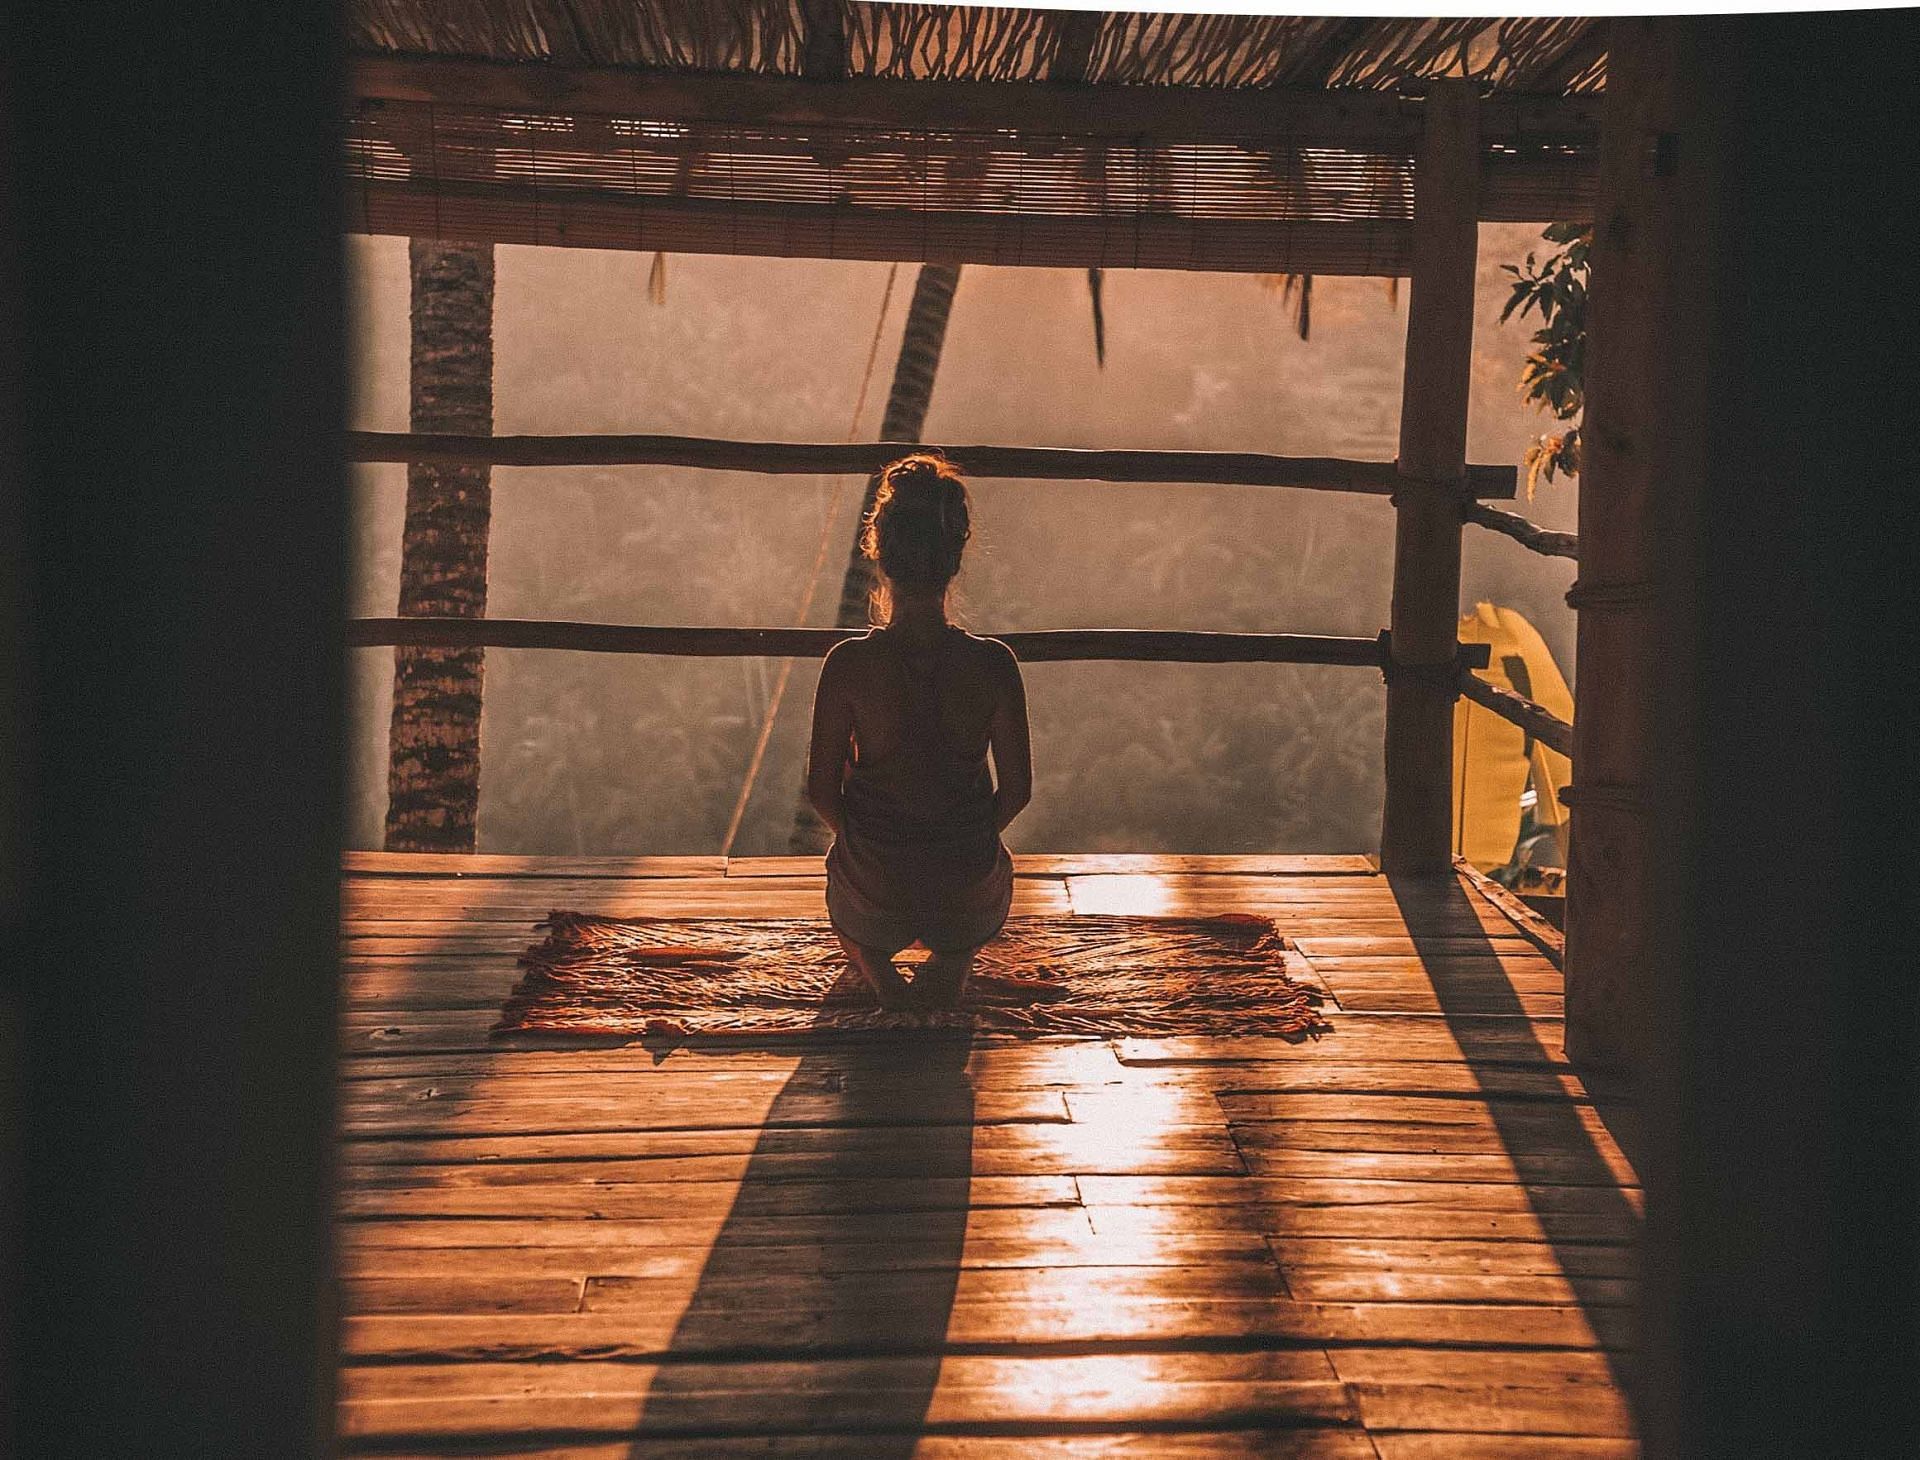 Want to explore the mind-body connection in a workout? Turn to yoga. (Image via Unsplash / Jared Rice)